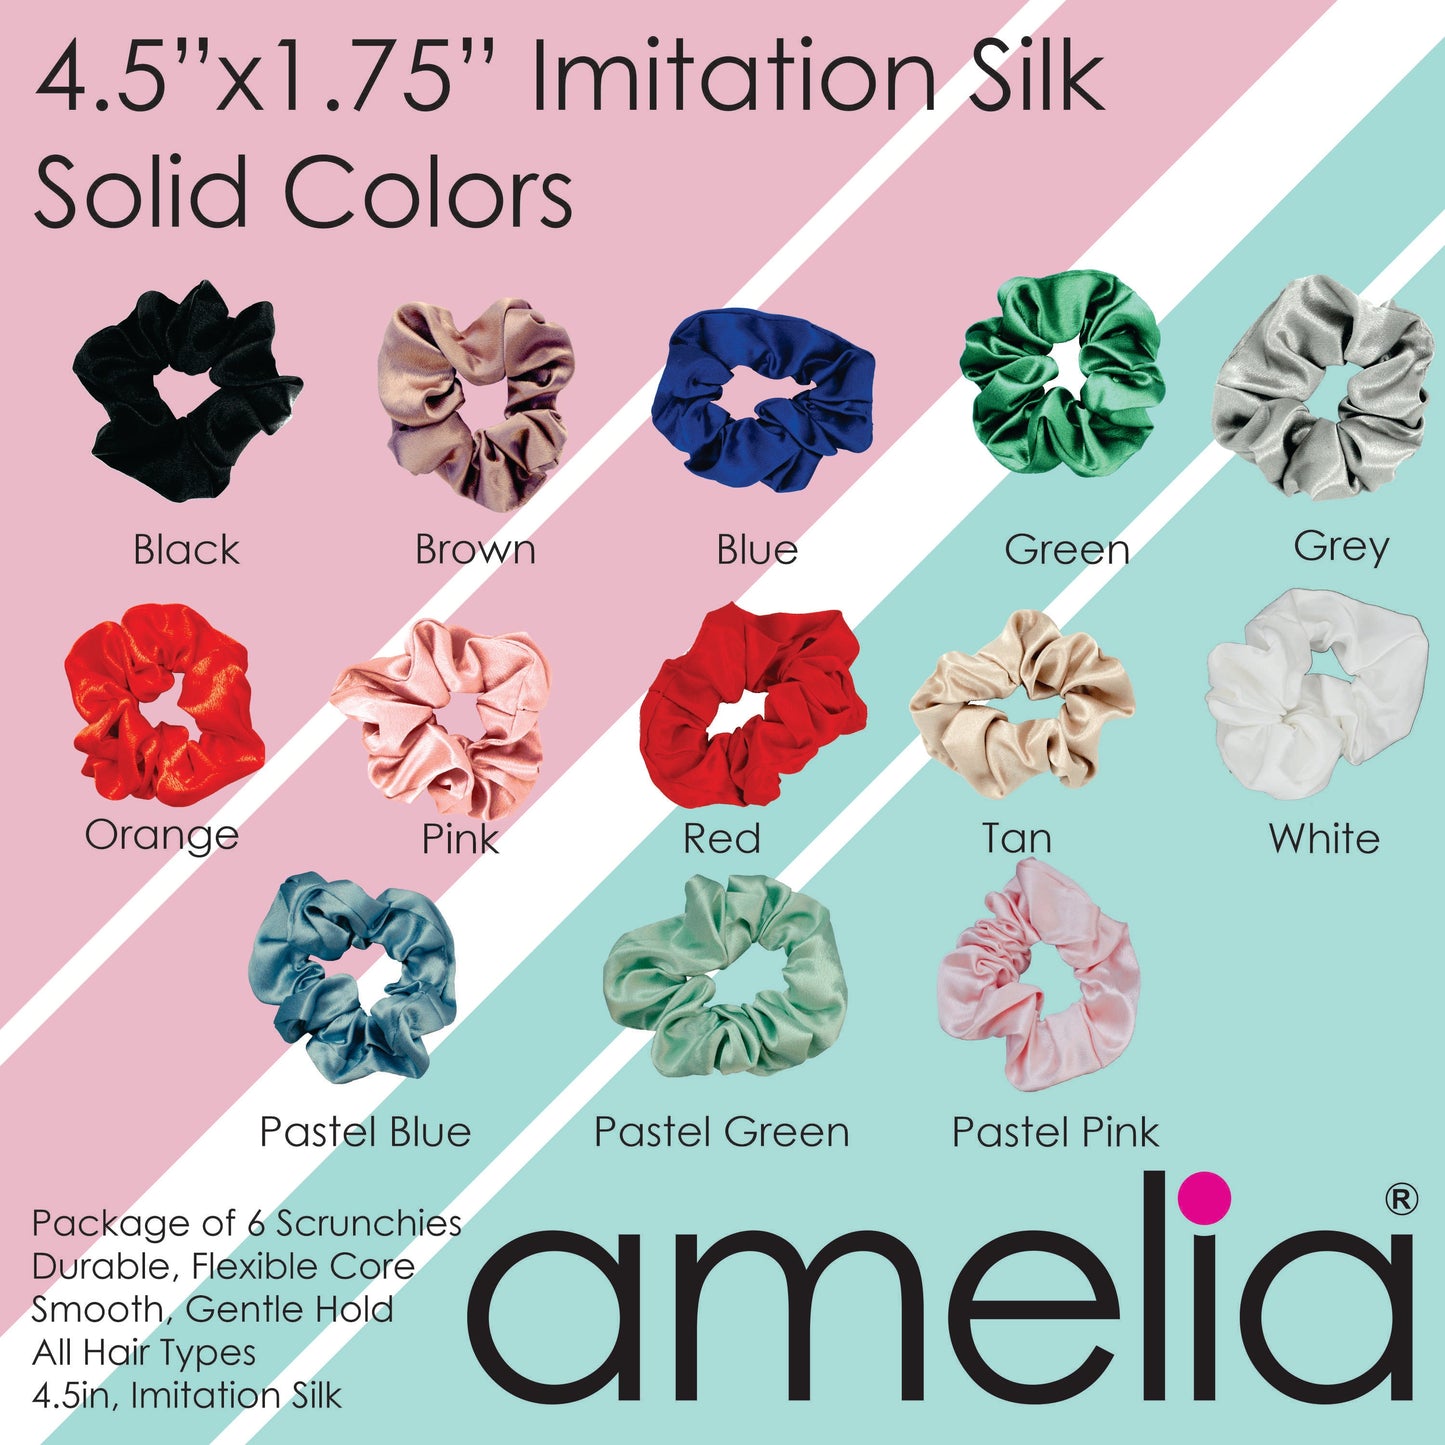 Amelia Beauty Products, Reds Mix Imitation Silk Scrunchies, 4.5in Diameter, Gentle on Hair, Strong Hold, No Snag, No Dents or Creases. 6 Pack